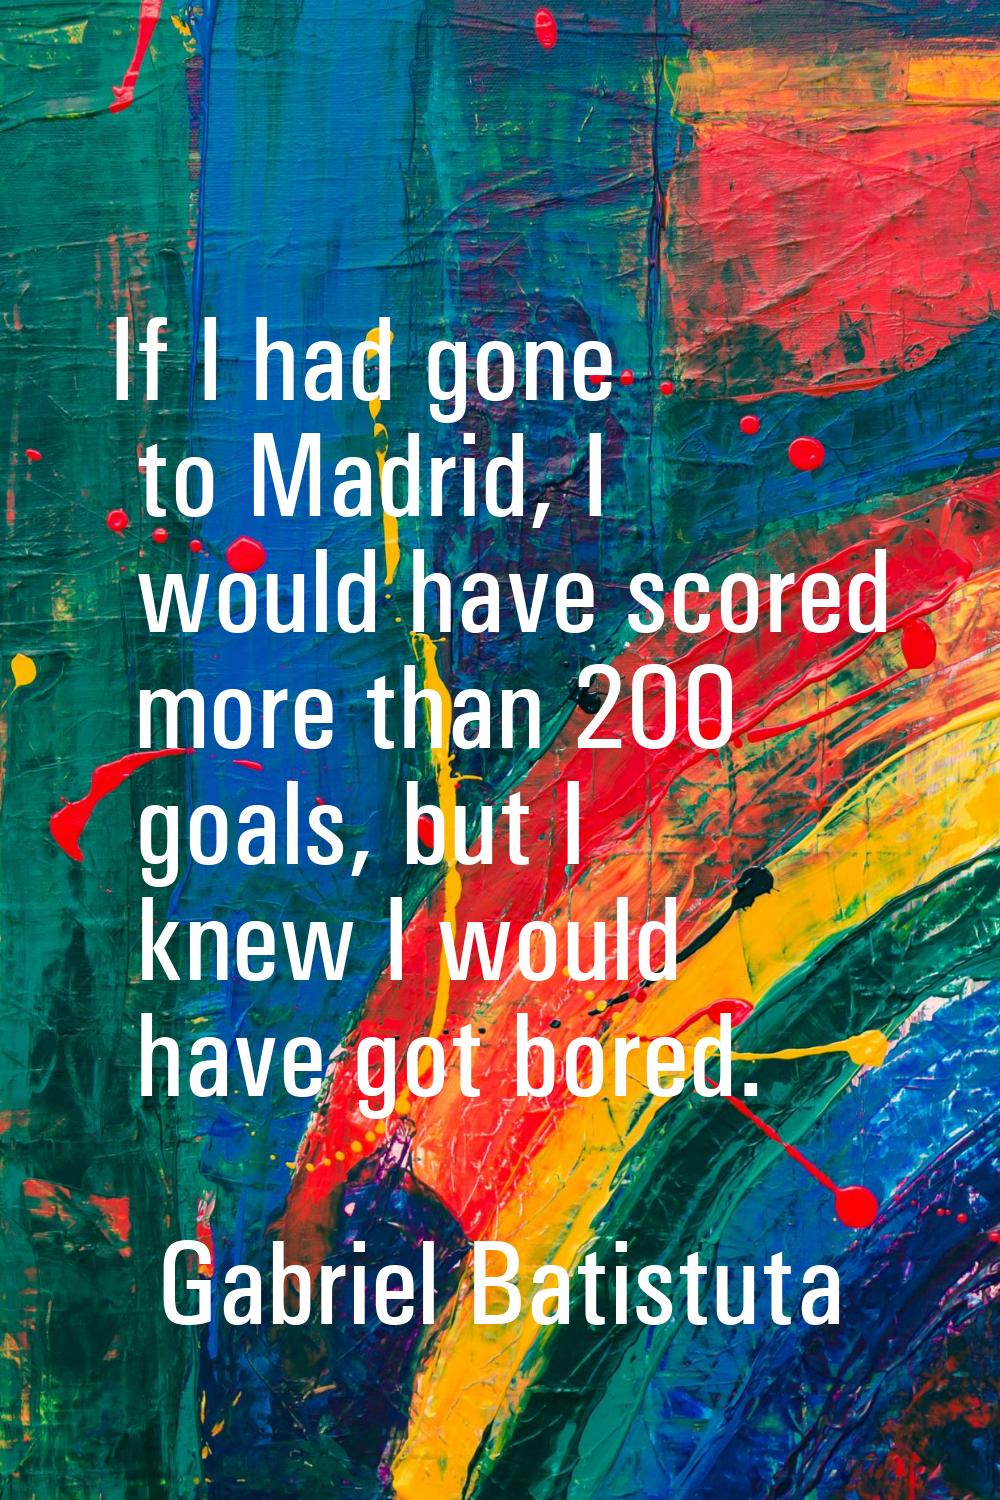 If I had gone to Madrid, I would have scored more than 200 goals, but I knew I would have got bored